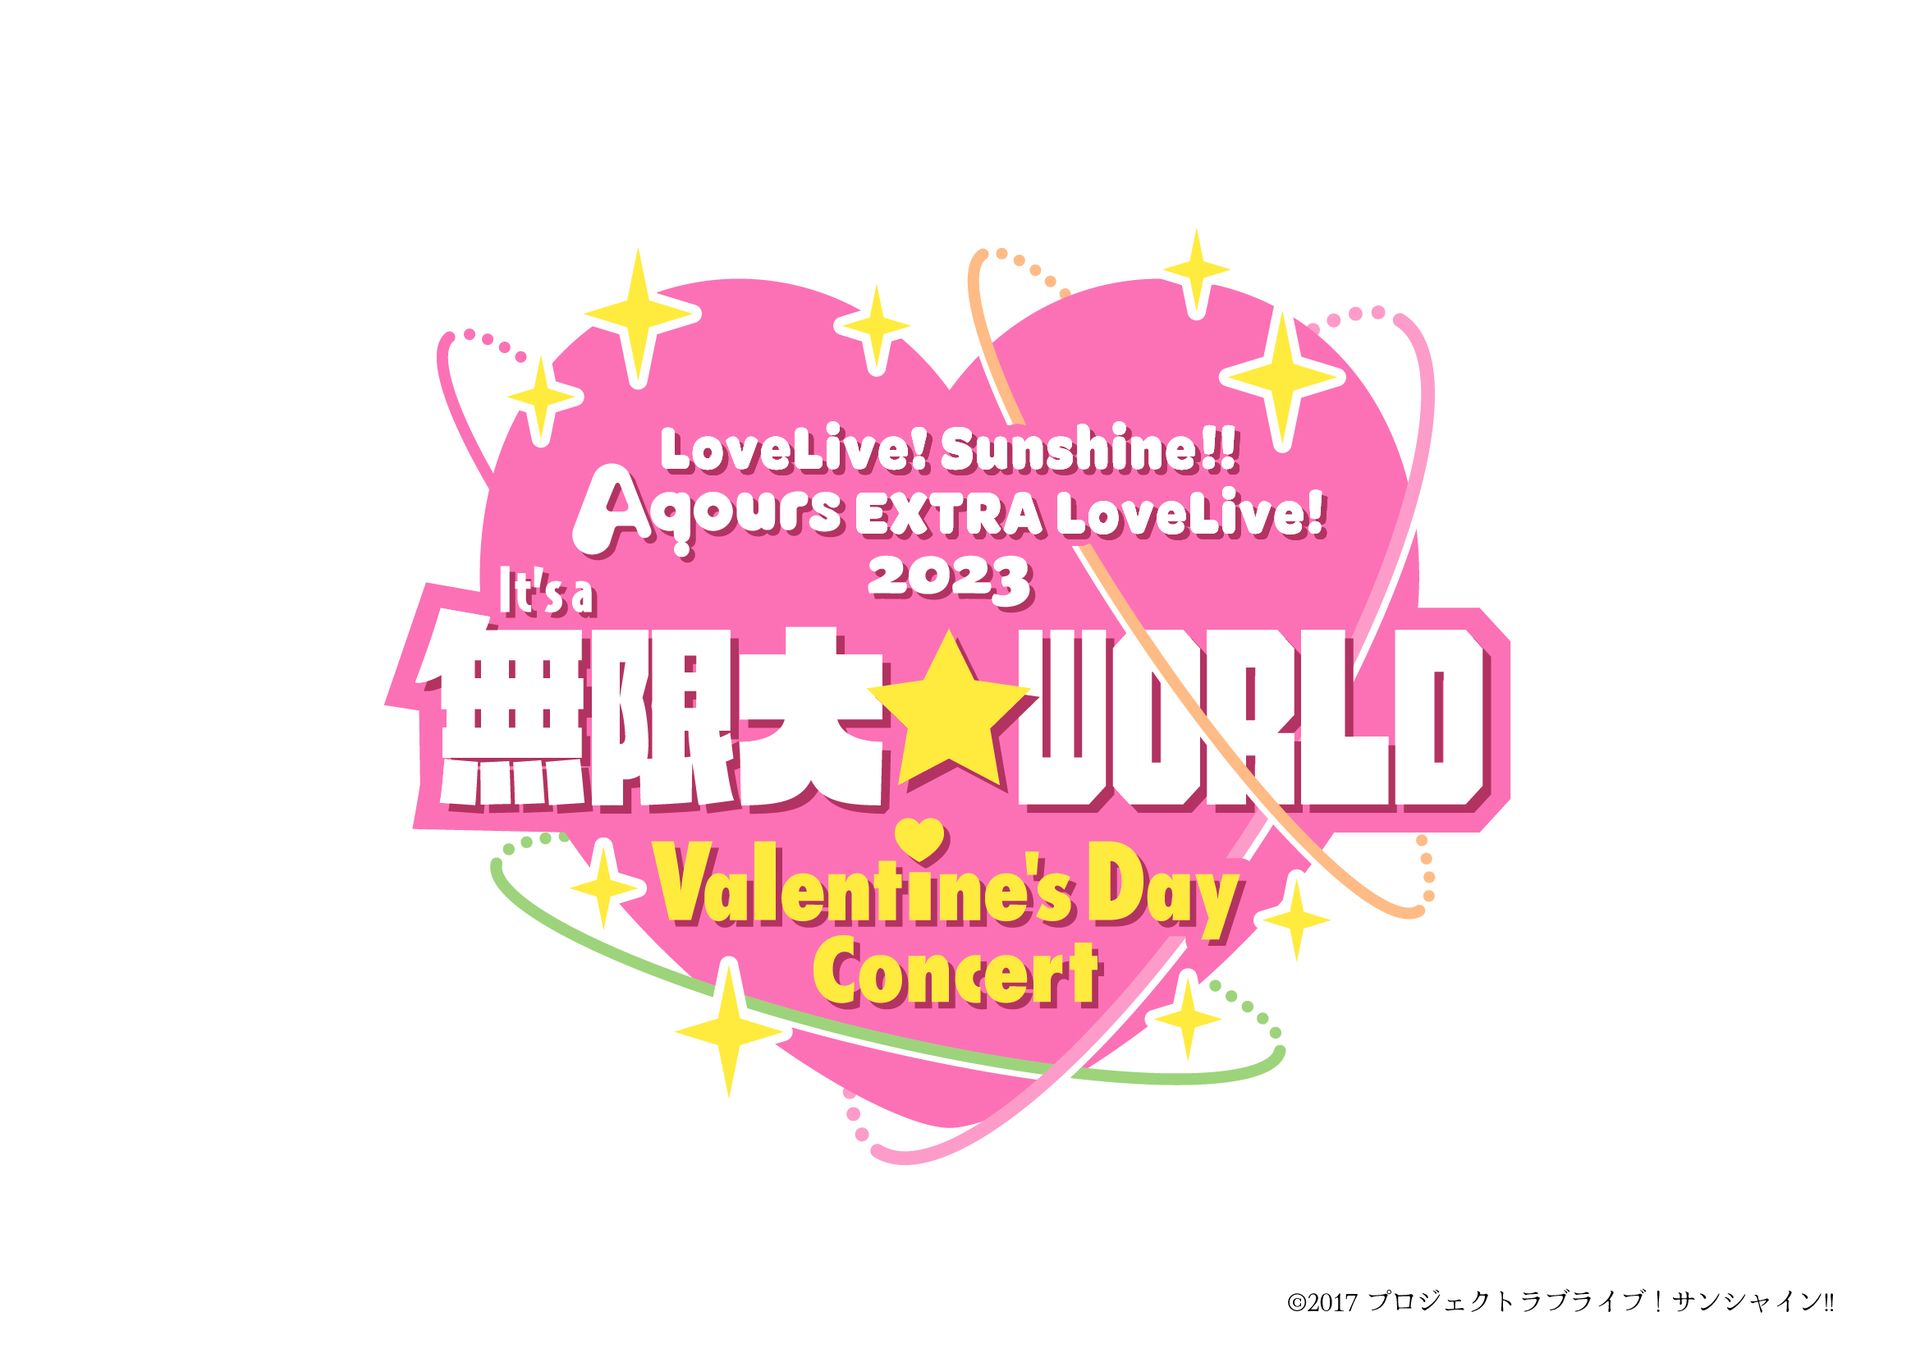 [Streaming+] Love Live! Sunshine!! AqoursEXTRA LoveLive! 2023 ～It's a Mugendai☆WORLD～＜Valentine's Day Concert＞Day.2 [with audio commentary by Aqours]